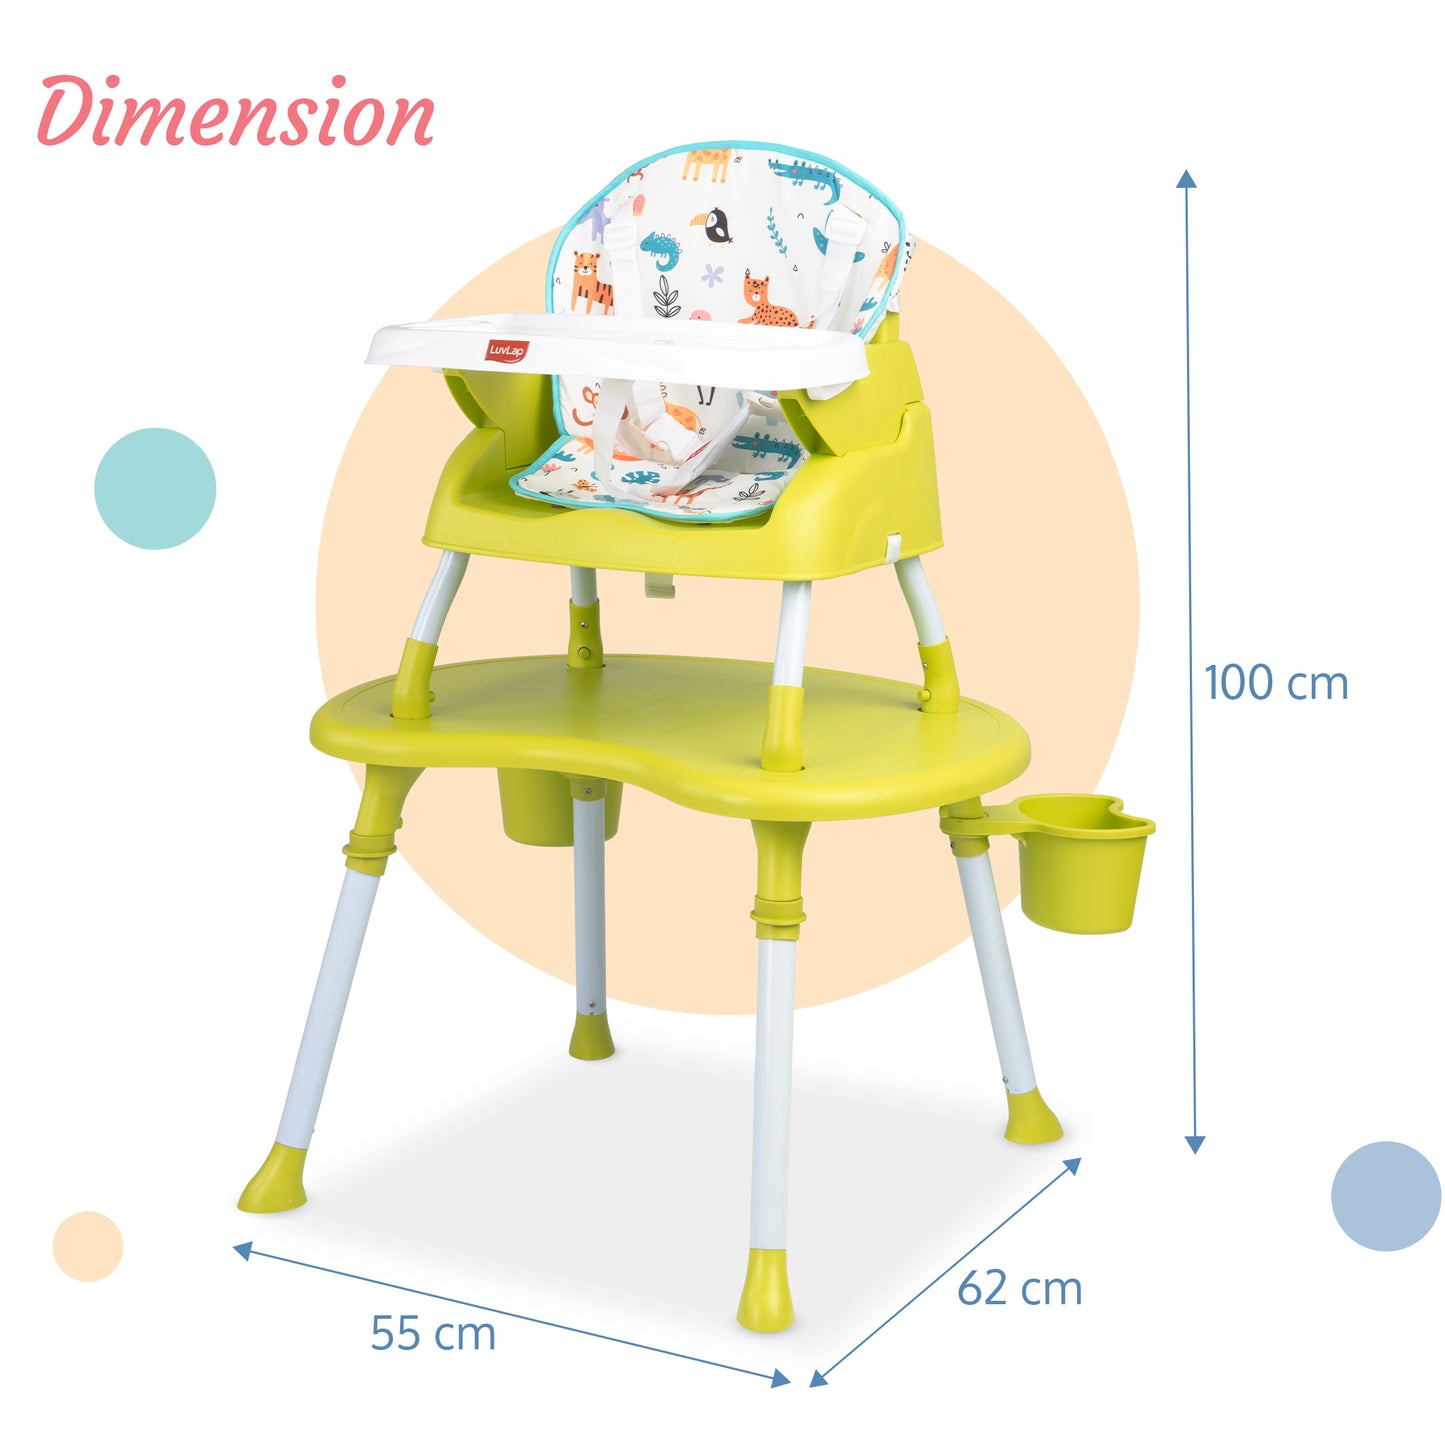 LuvLap 4 in 1 Convertible Baby High Chair with Printed Cushion, 5 Point Safety Belts, High Chair, Low Chair, Booster Chair and Table for Baby, Removable & Washable Food Tray 6 Months+, Green